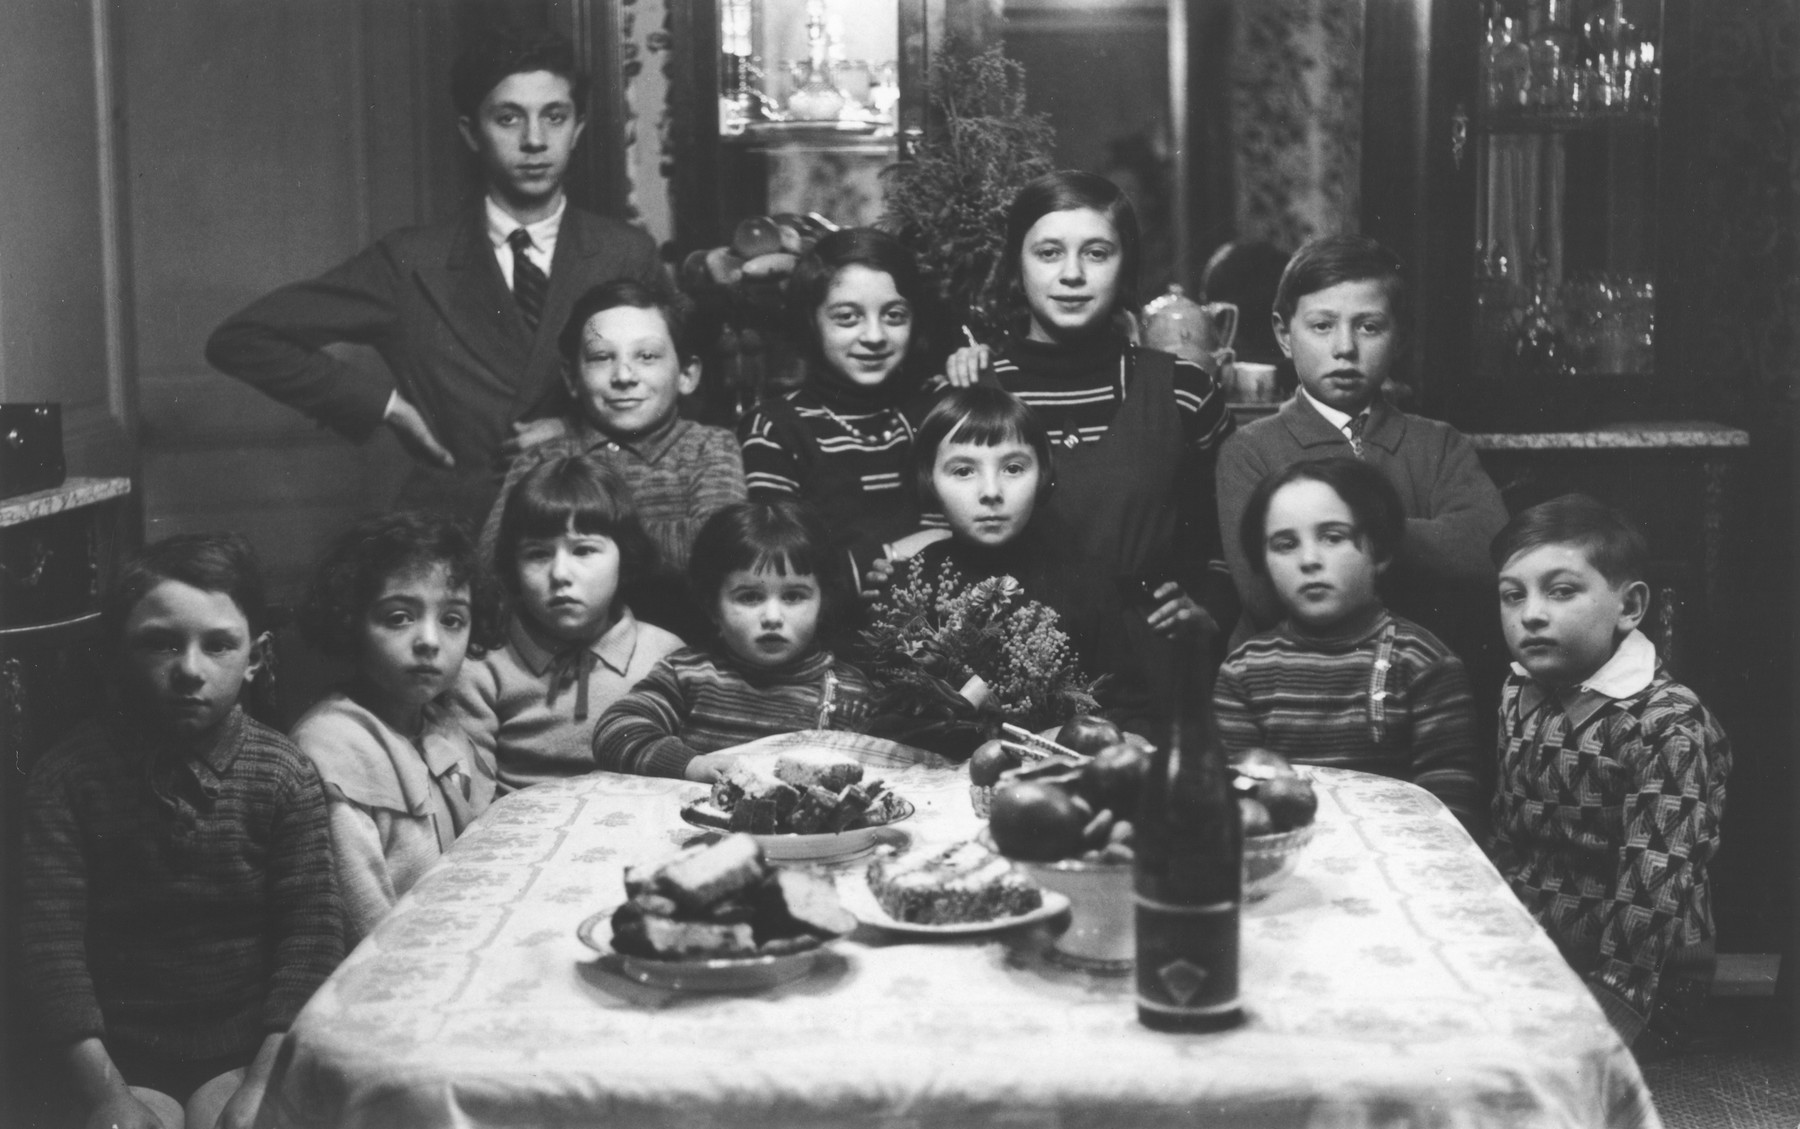 Group portrait of Jewish children gathered around a table at a birthday party in Paris.

Among those pictured are Aba Sztern (second row far right) and his sister Catherine (front row, third from the left).